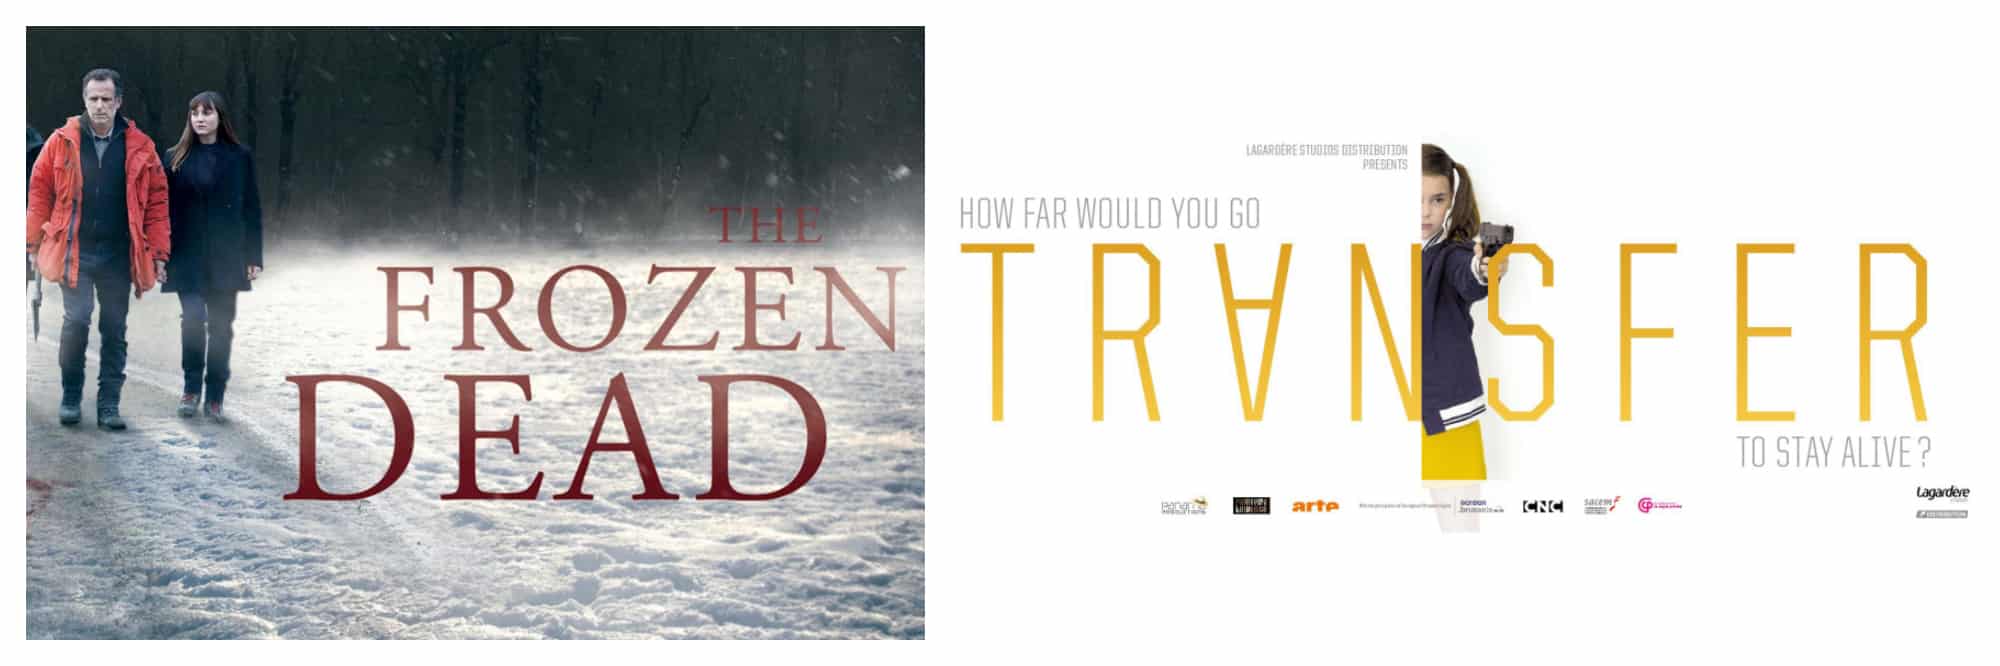 Left, the poster for French Netflix series The Frozen Dead, with the three main characters walking in the snow following a trail of blood. Right, the poster for Transfer, with a young girl pointing a gun between the letters 'n' and 's'.